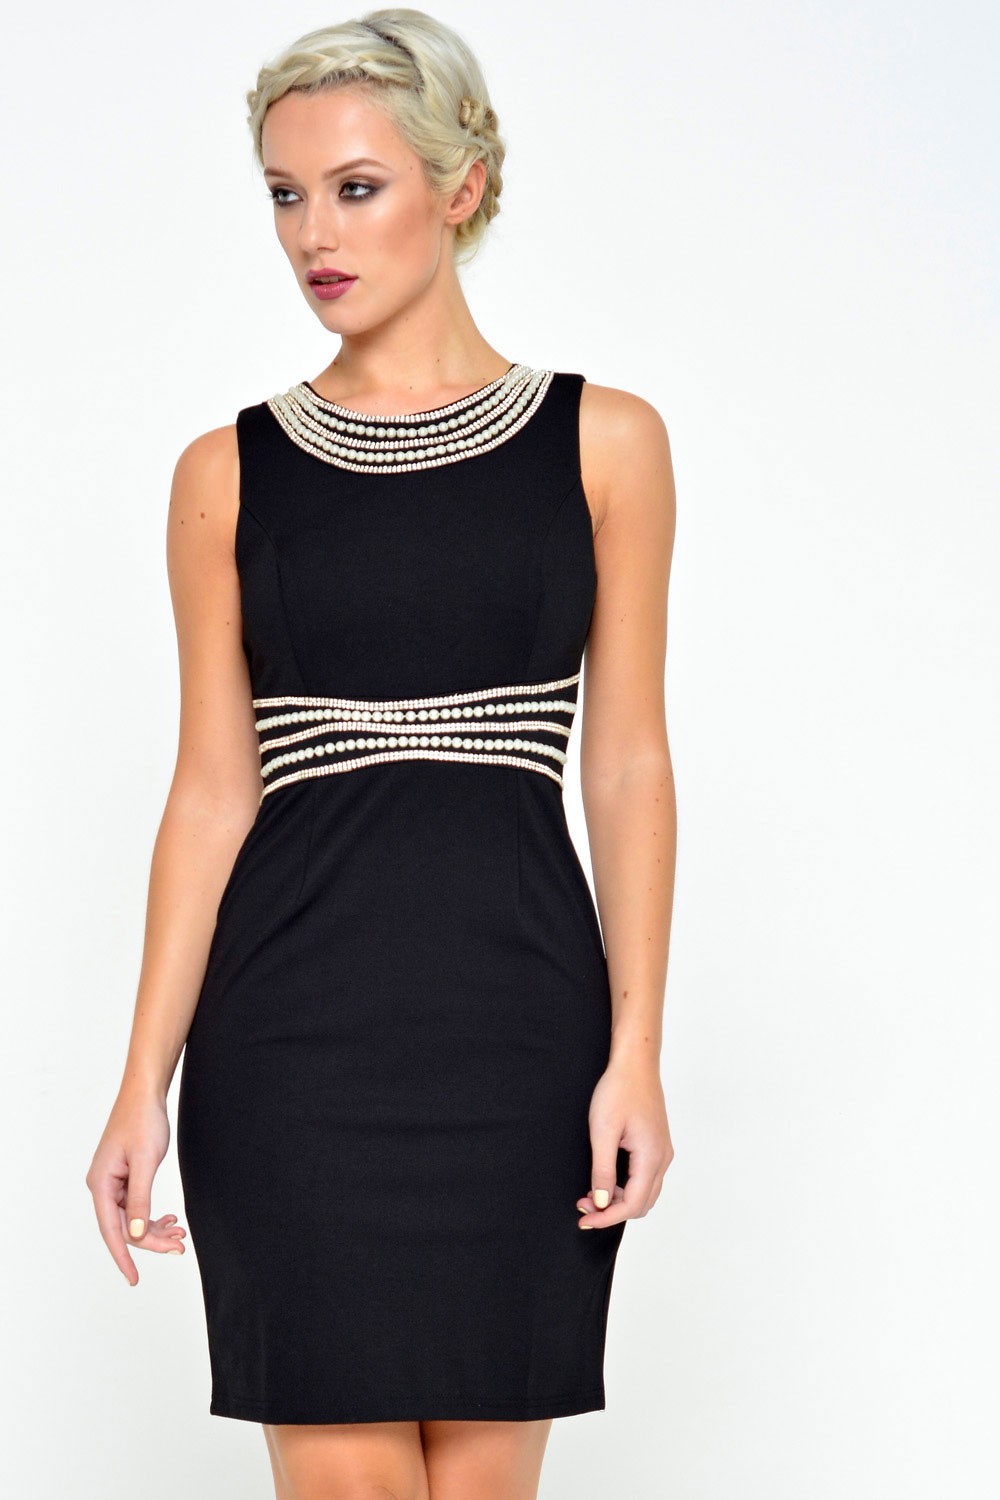 Charms Nancy Pearl Embellished Dress in Black | iCLOTHING